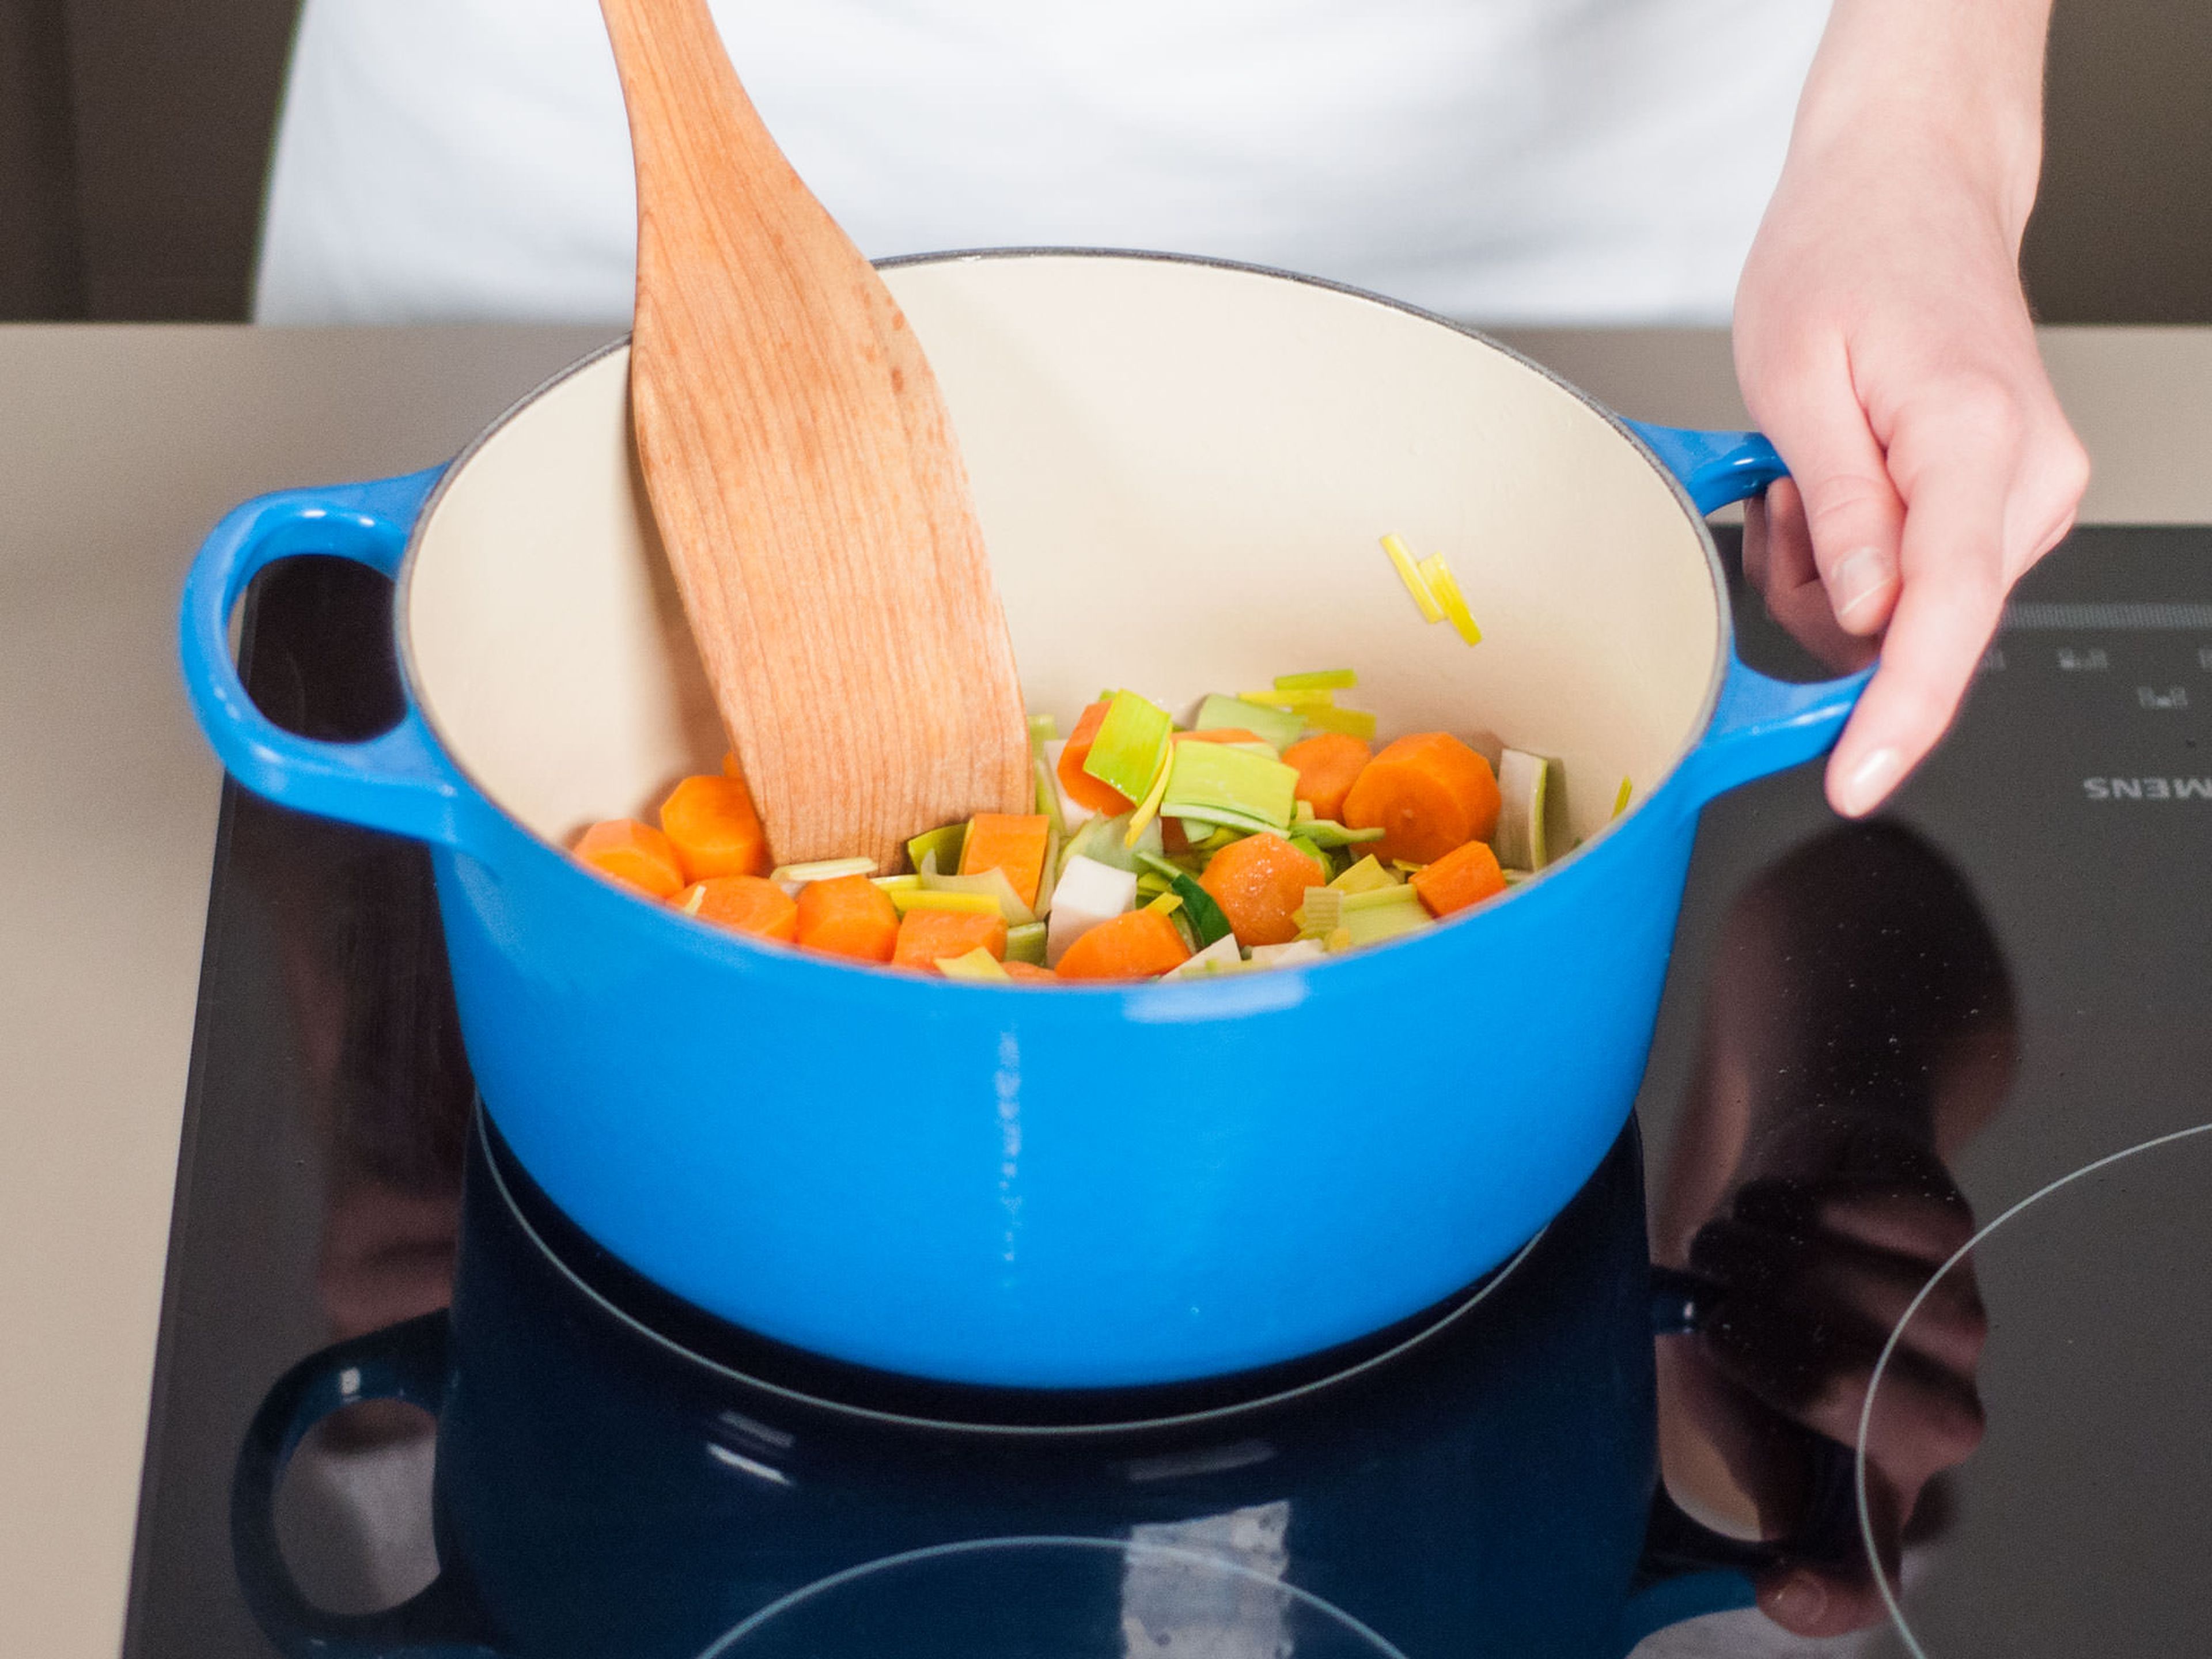 Preheat oven to 180°C/400°F. To make the vegetable stock, heat some vegetable oil in a large saucepan. Add leek, carrot, celery root, and parsley and sauté until softened, approx. 8 – 10 min.